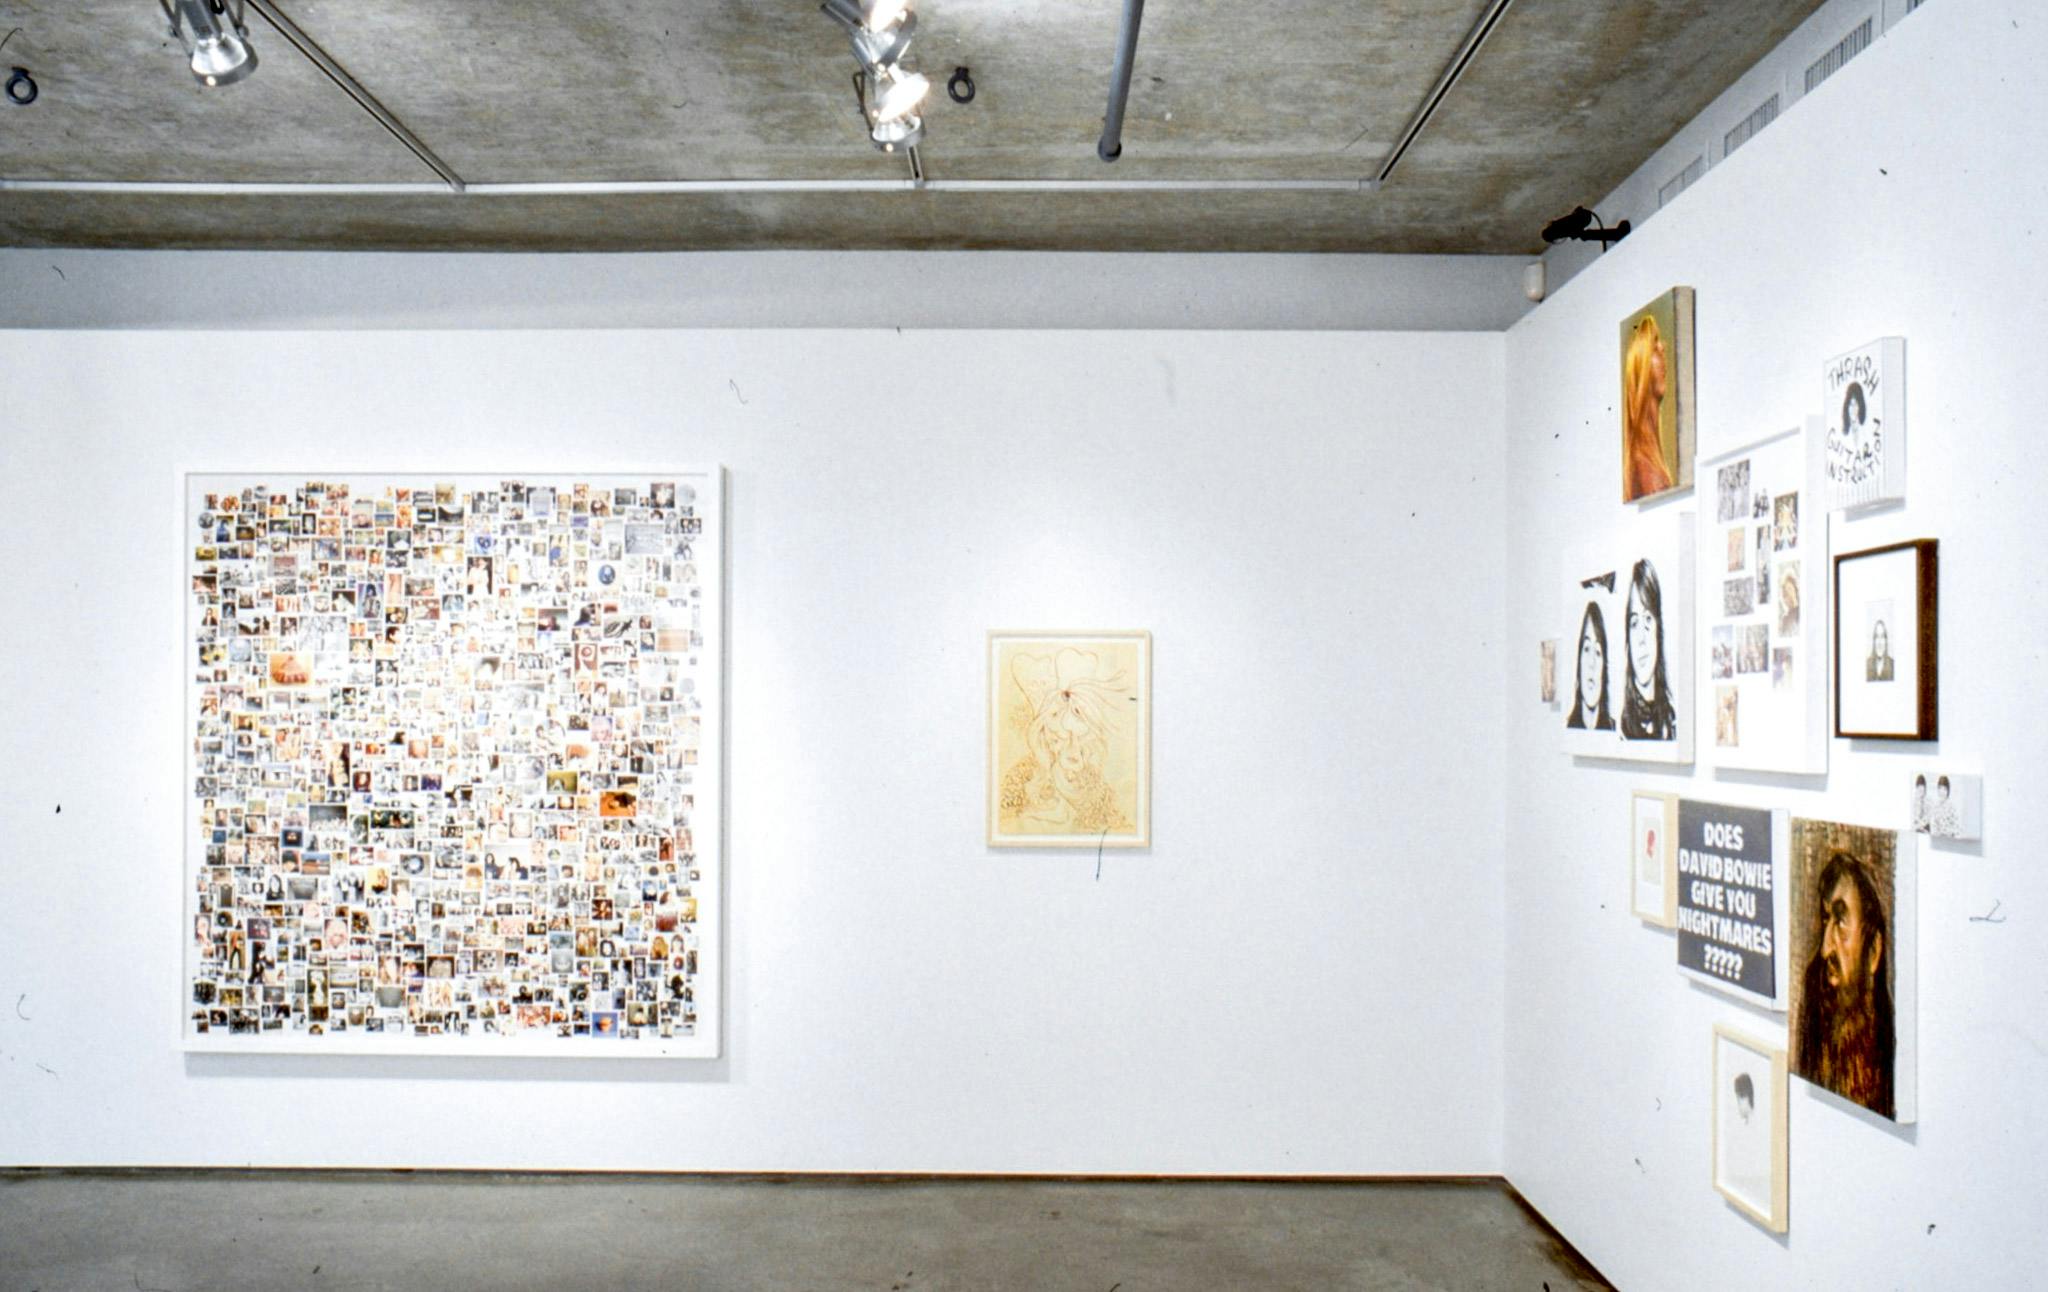 Installation image of works by Steven Shearer. Paintings, collage works, and photographs are mounted on the walls. On a far wall, a large photo collage work is installed.